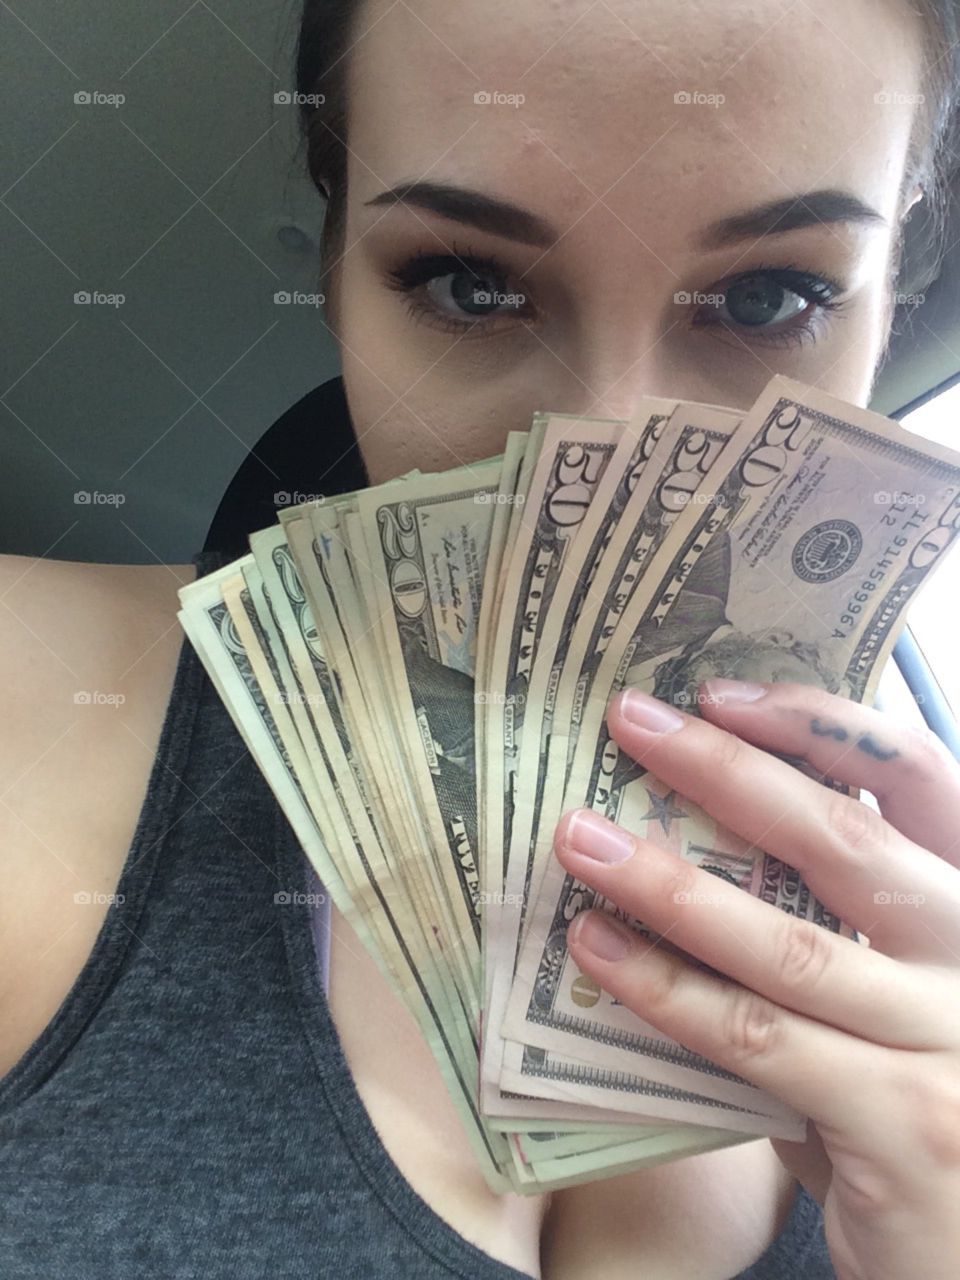 girl with money